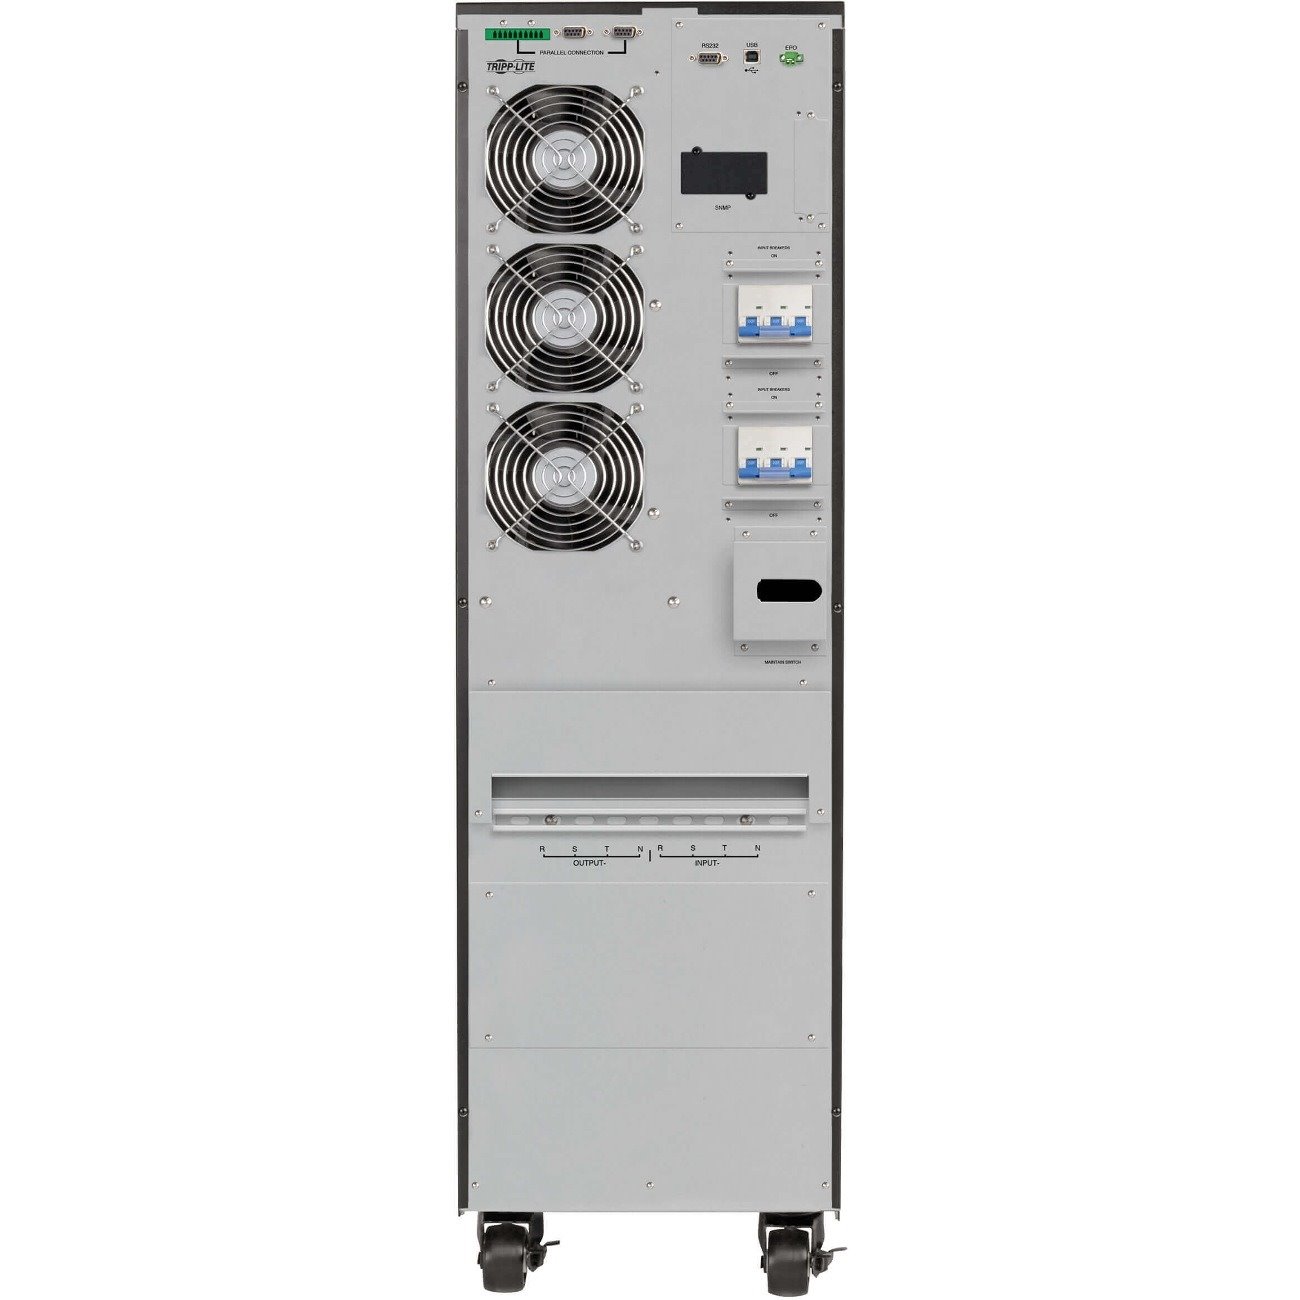 Tripp Lite by Eaton SmartOnline S3MX Series 3-Phase 380/400/415V 40kVA 36kW On-Line Double-Conversion UPS, Parallel for Capacity and Redundancy, Single & Dual AC Input, No Internal Batteries